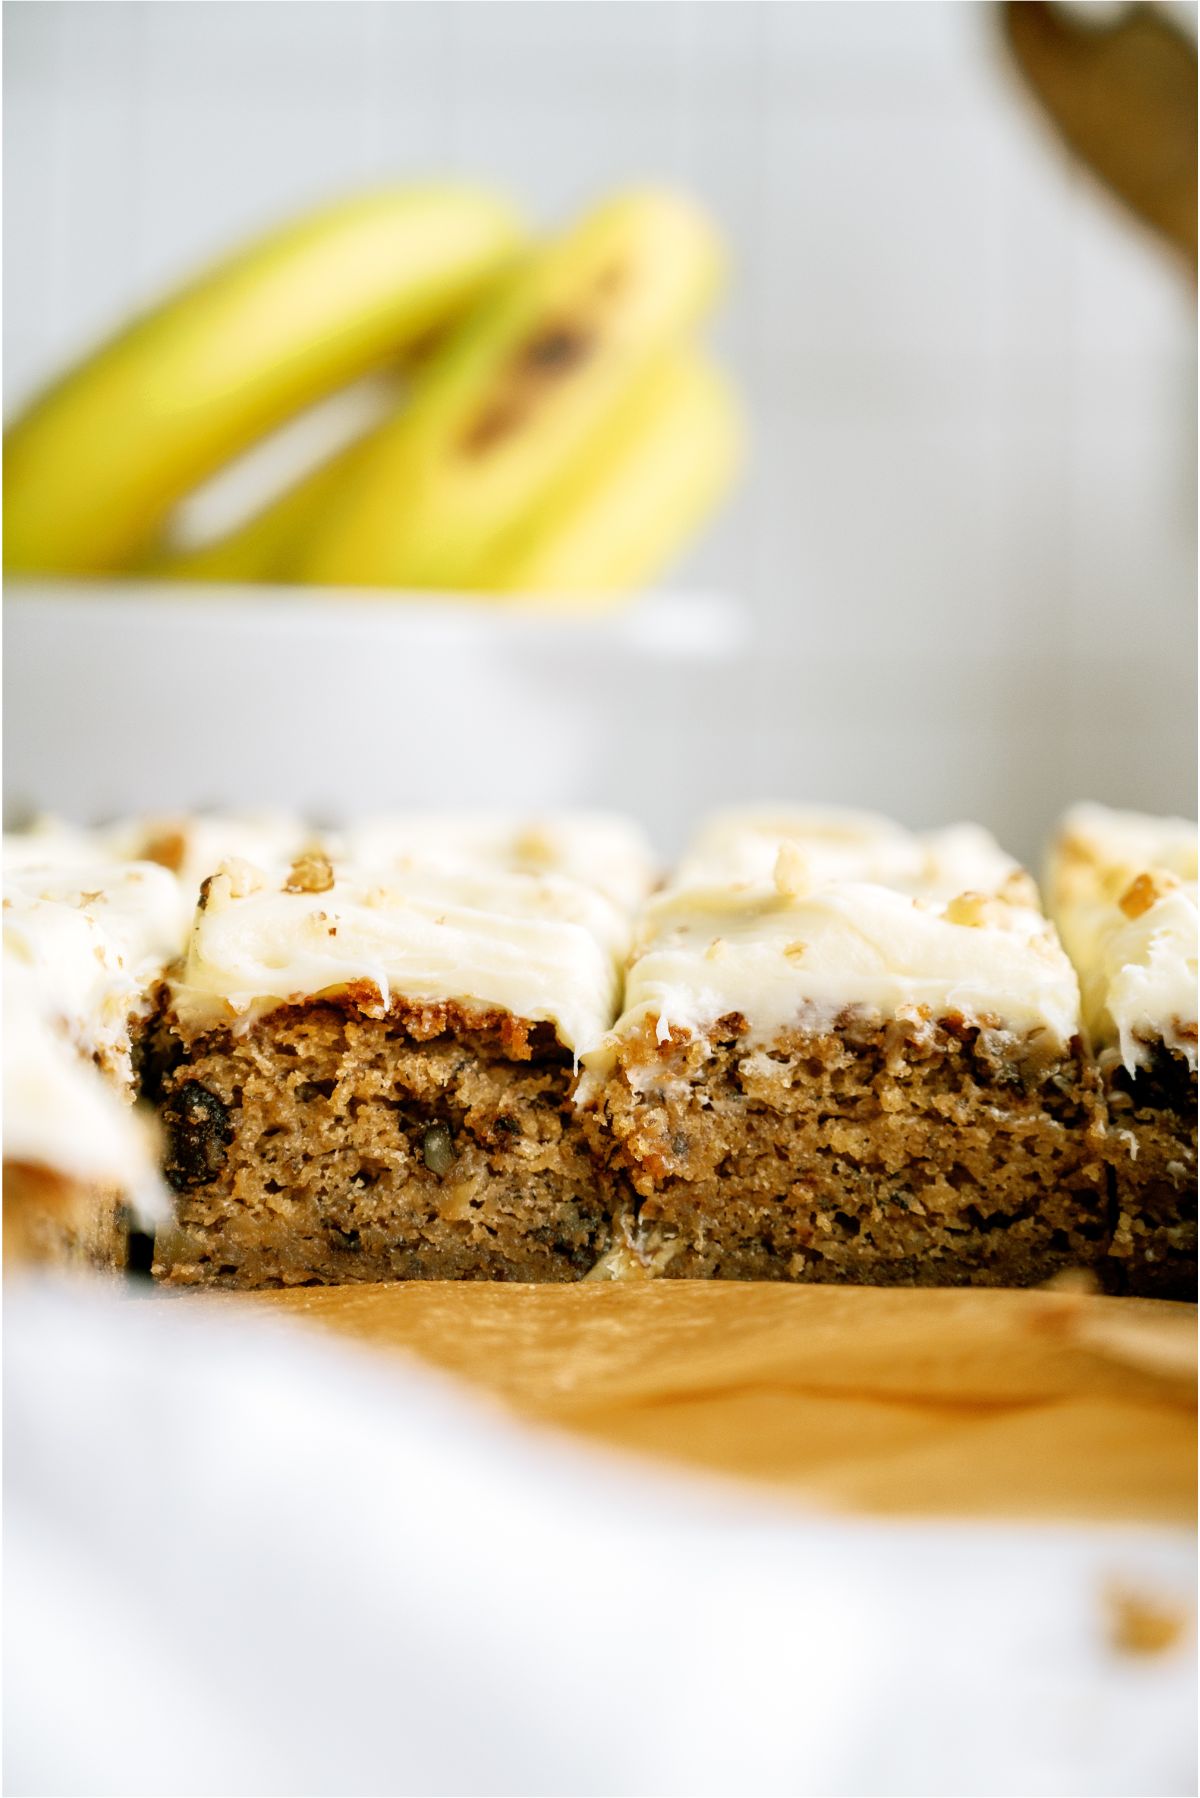 Sliced Banana Bread Brownies with frosting with bananas in the background